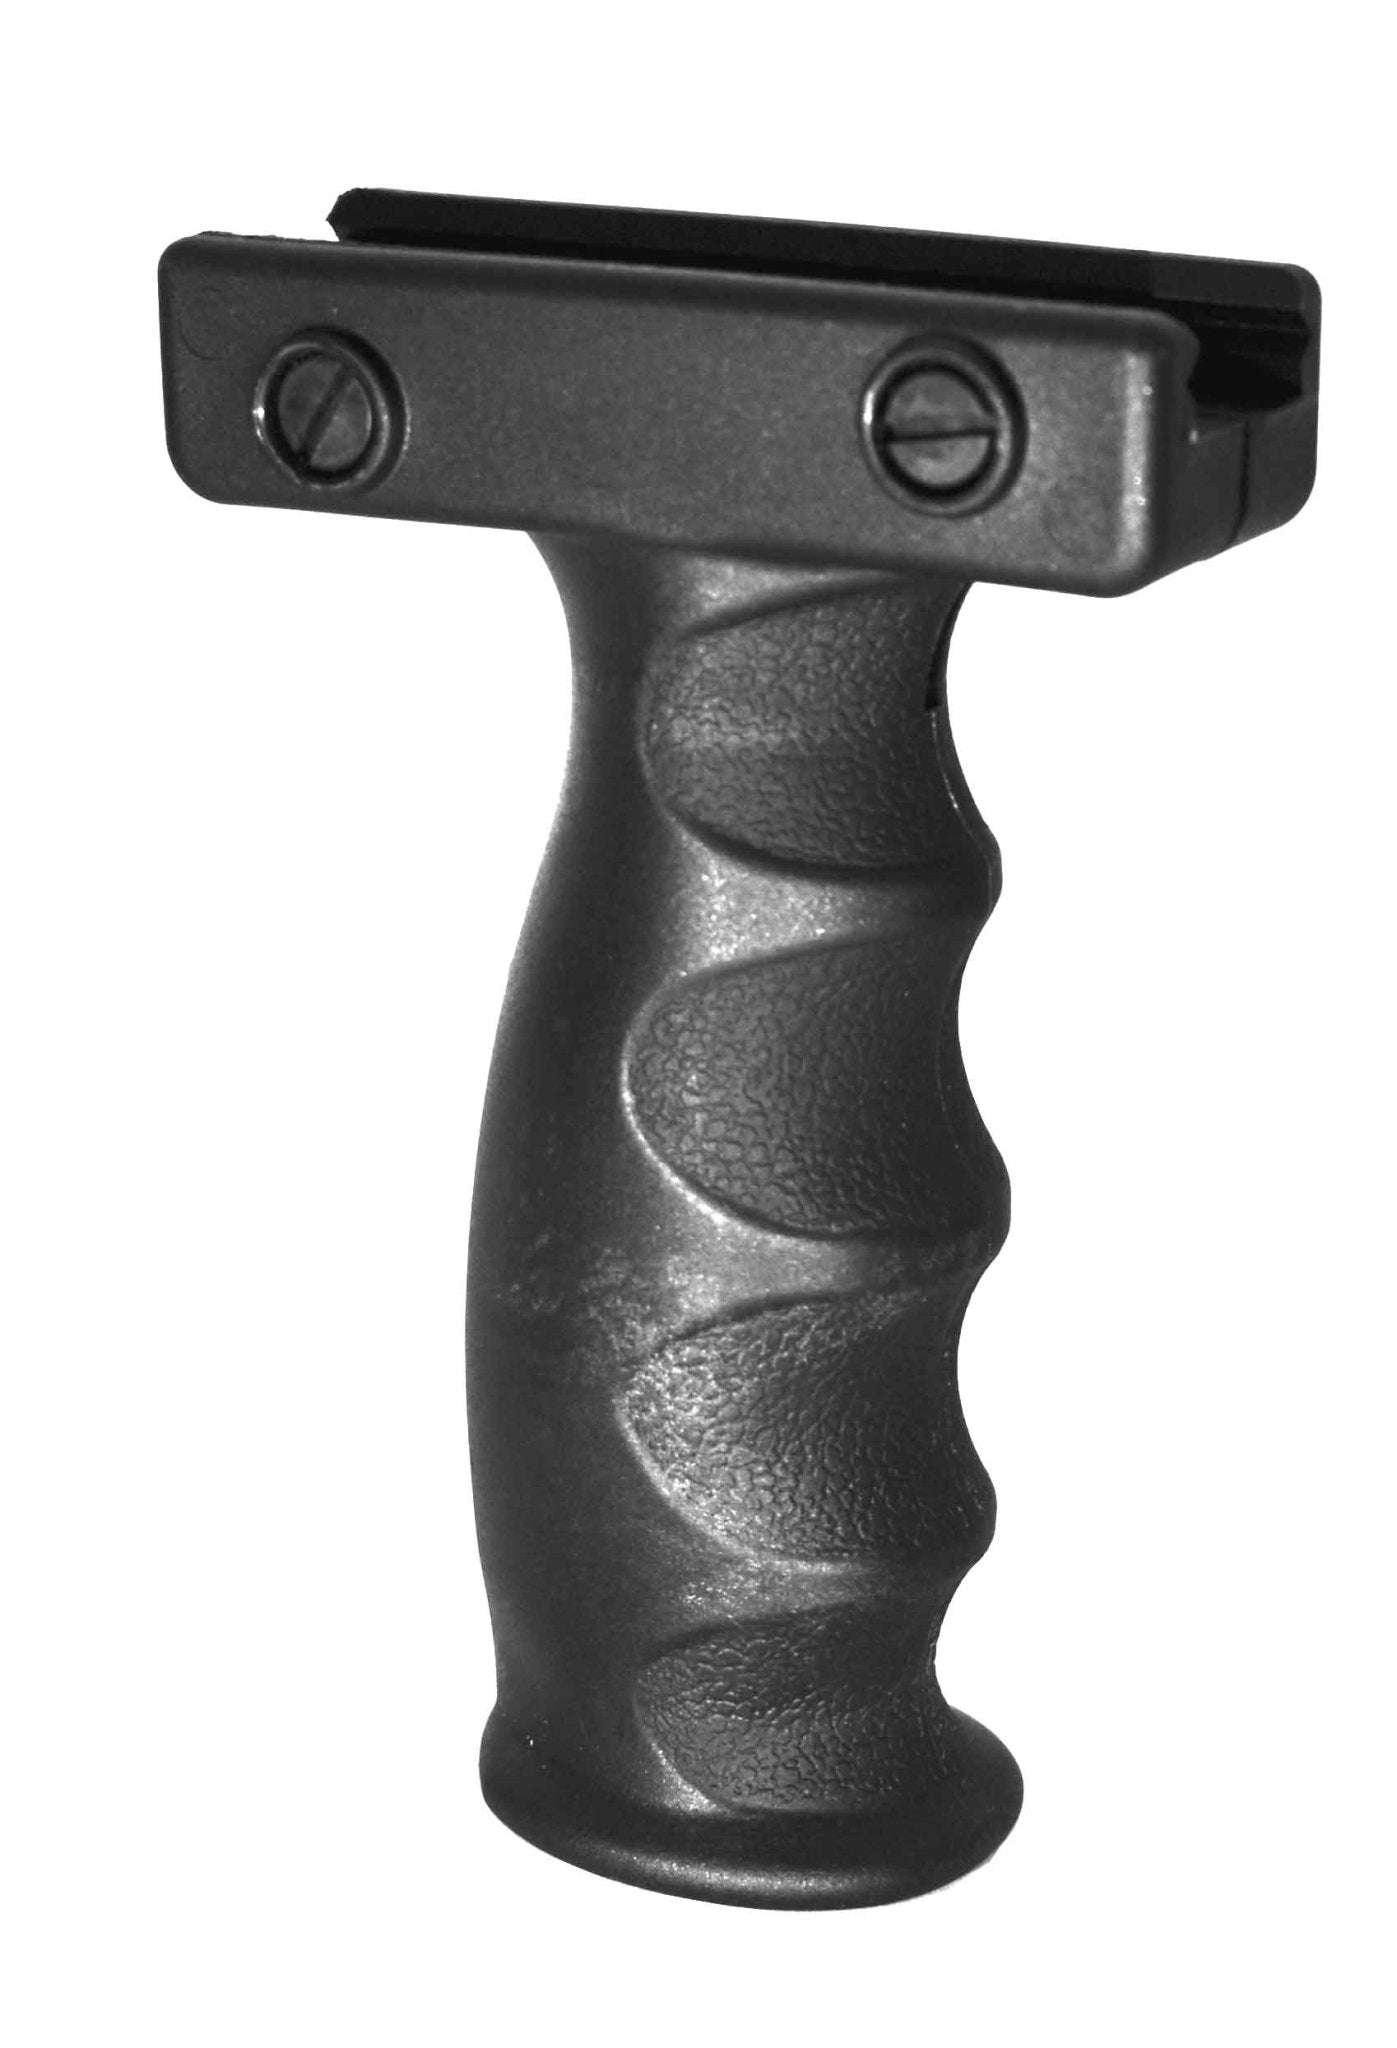 Mossberg 500A 12 Gauge forend Pump handguard with side rails and tactical grip black hunting tactical home defense. - TRINITY SUPPLY INC